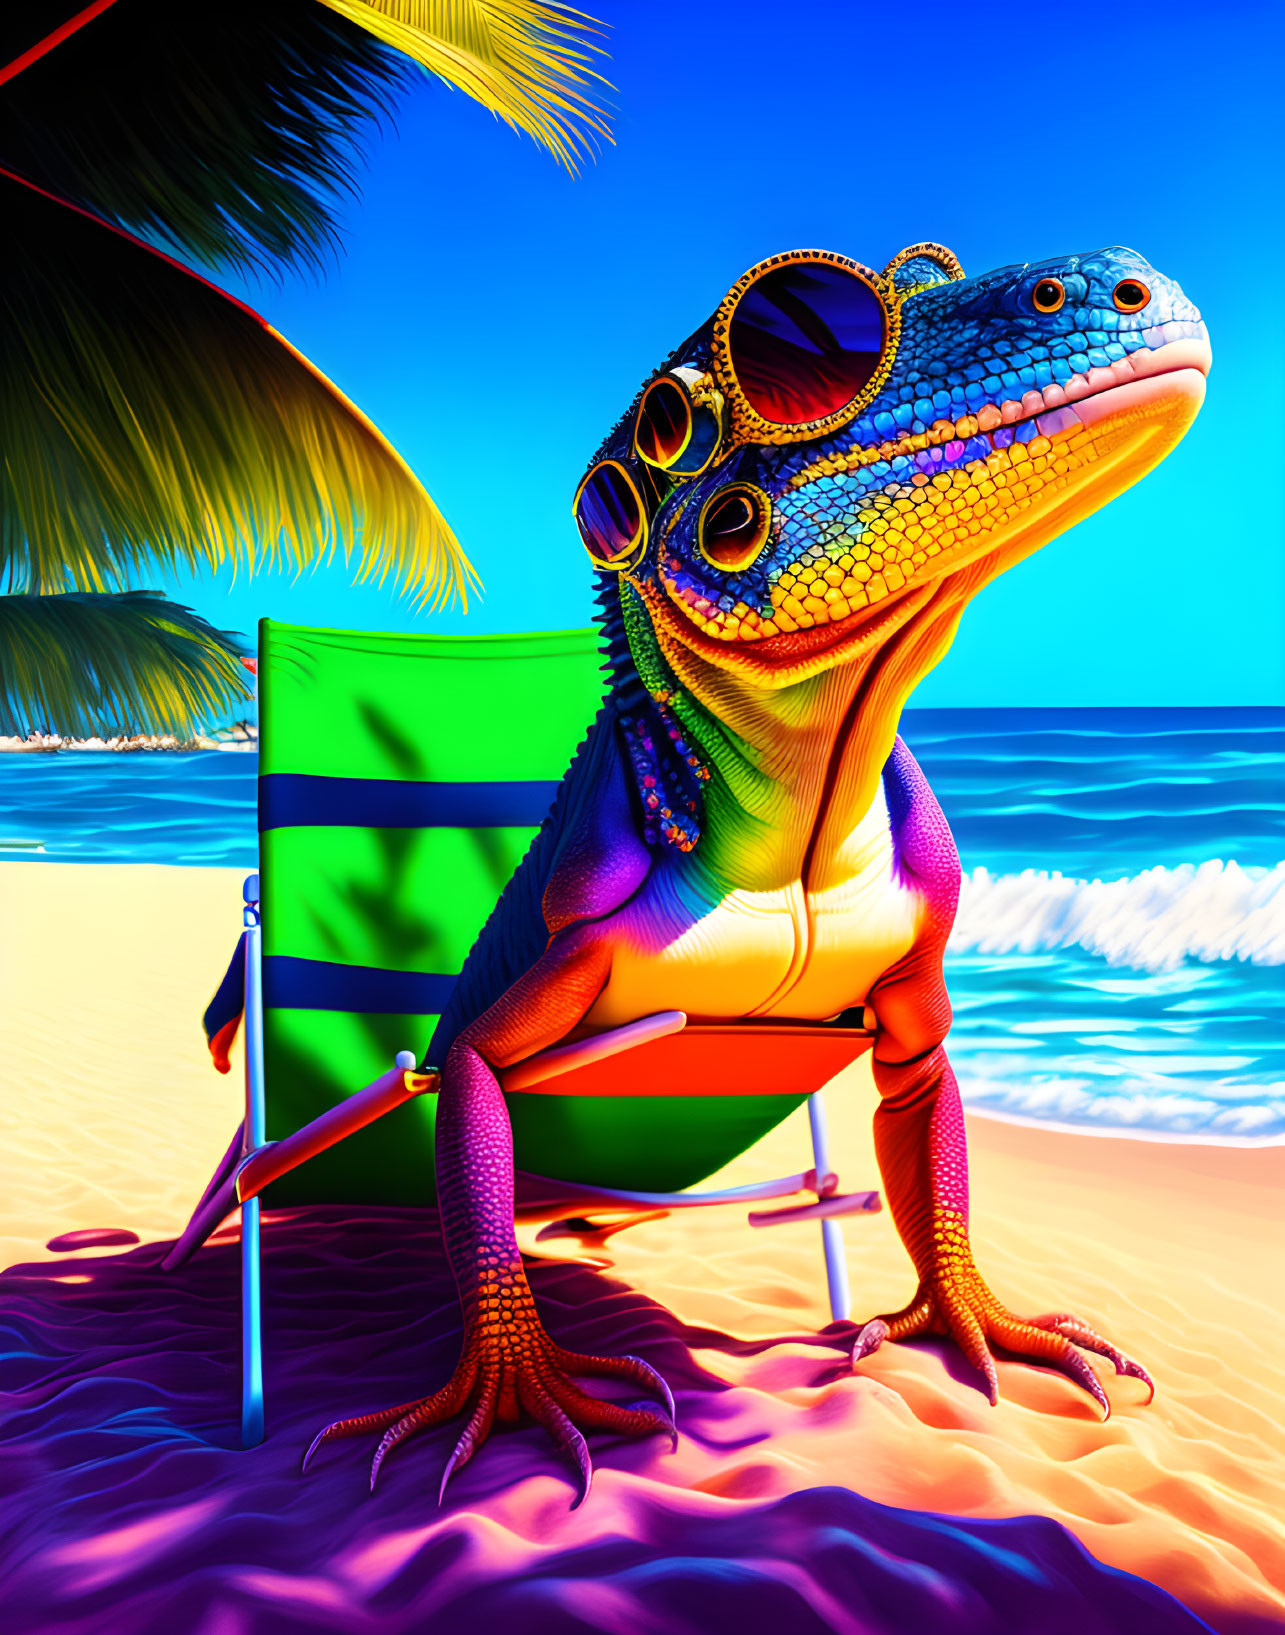 Colorful Anthropomorphic Lizard Relaxing on Beach Chair with Sunglasses